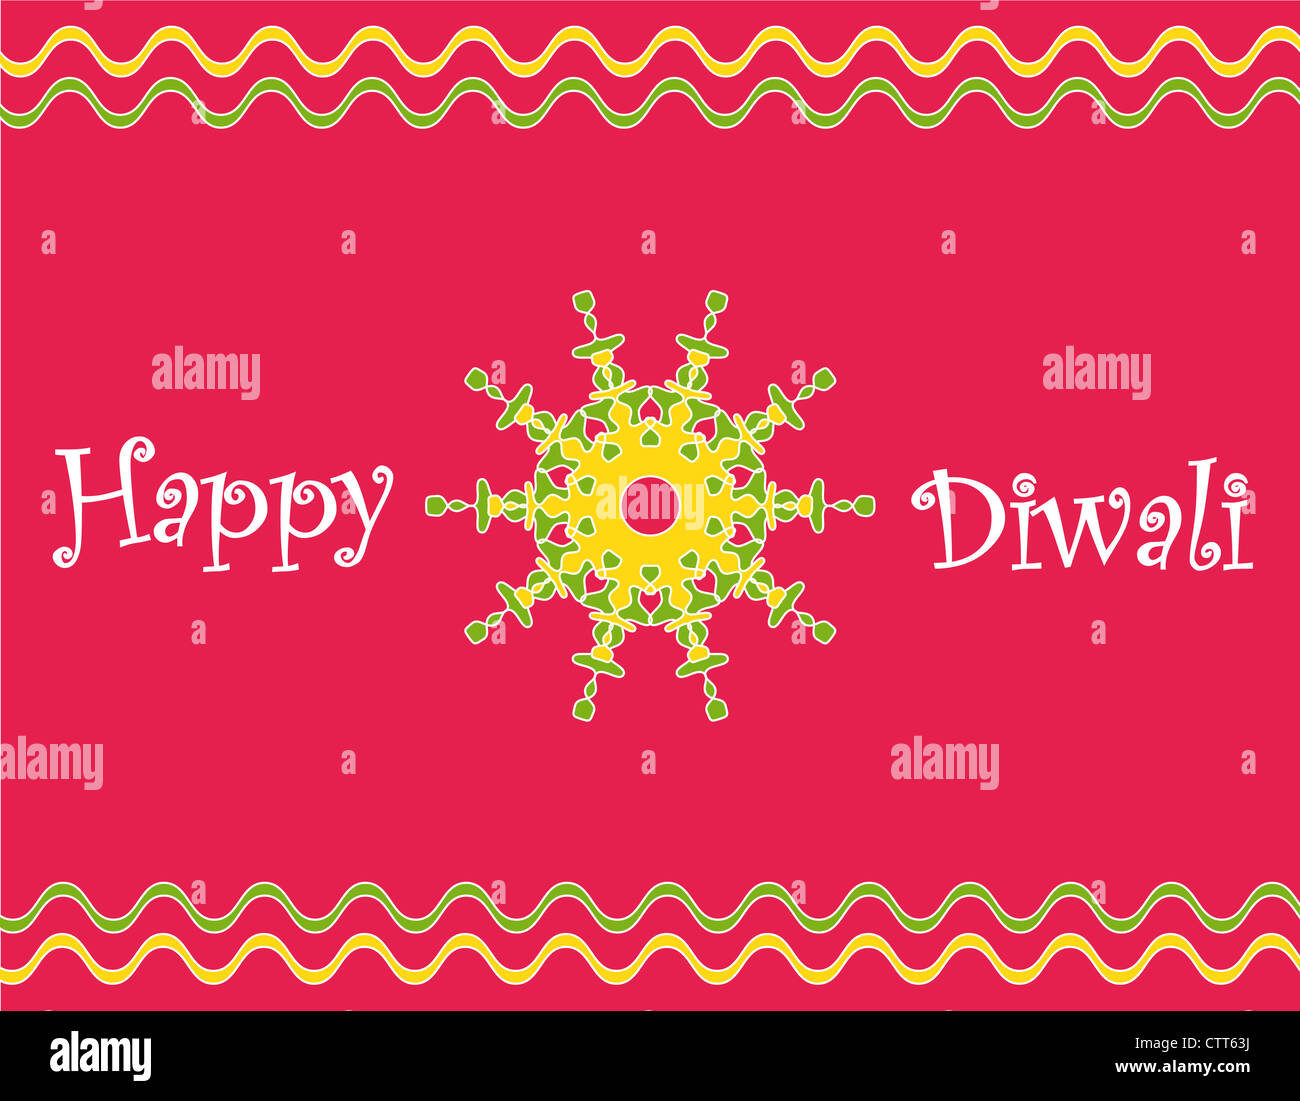 Colorful Indian festival Diwali greetings with decorative design Stock Photo